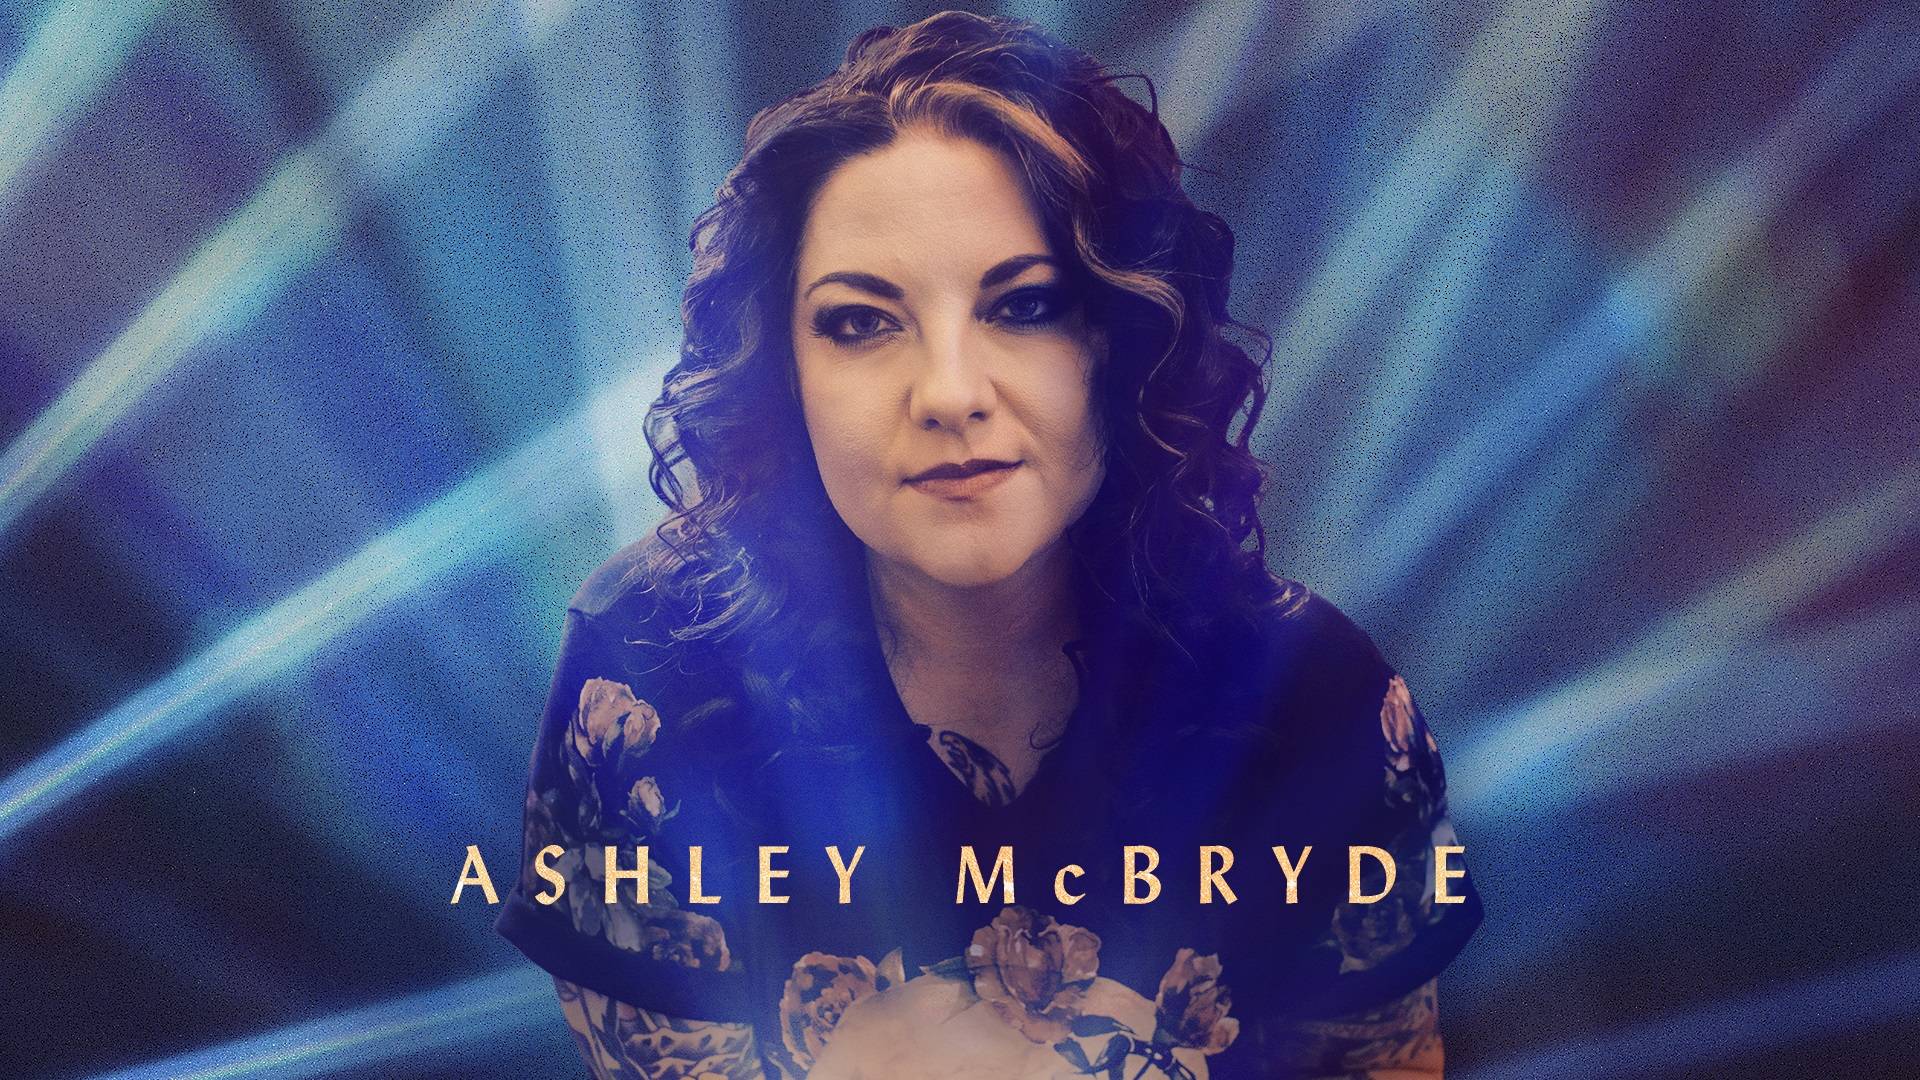 Ashley McBryde CMT Breakout Artist of the Year News CMT